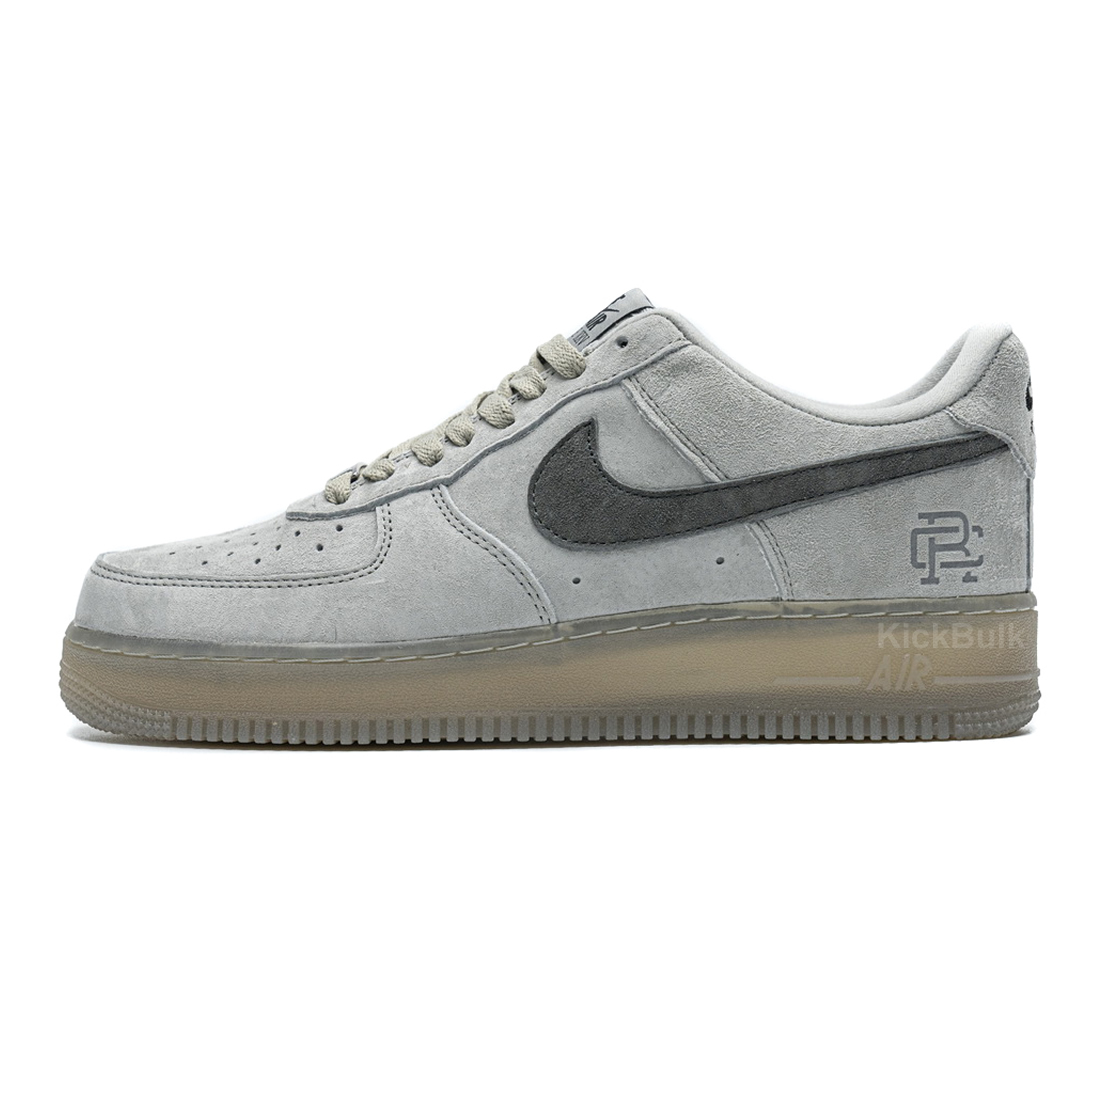 Reigning Champ Nike Air Force 1 Low Suede Light Grey Aa1117 118 1 - www.kickbulk.cc